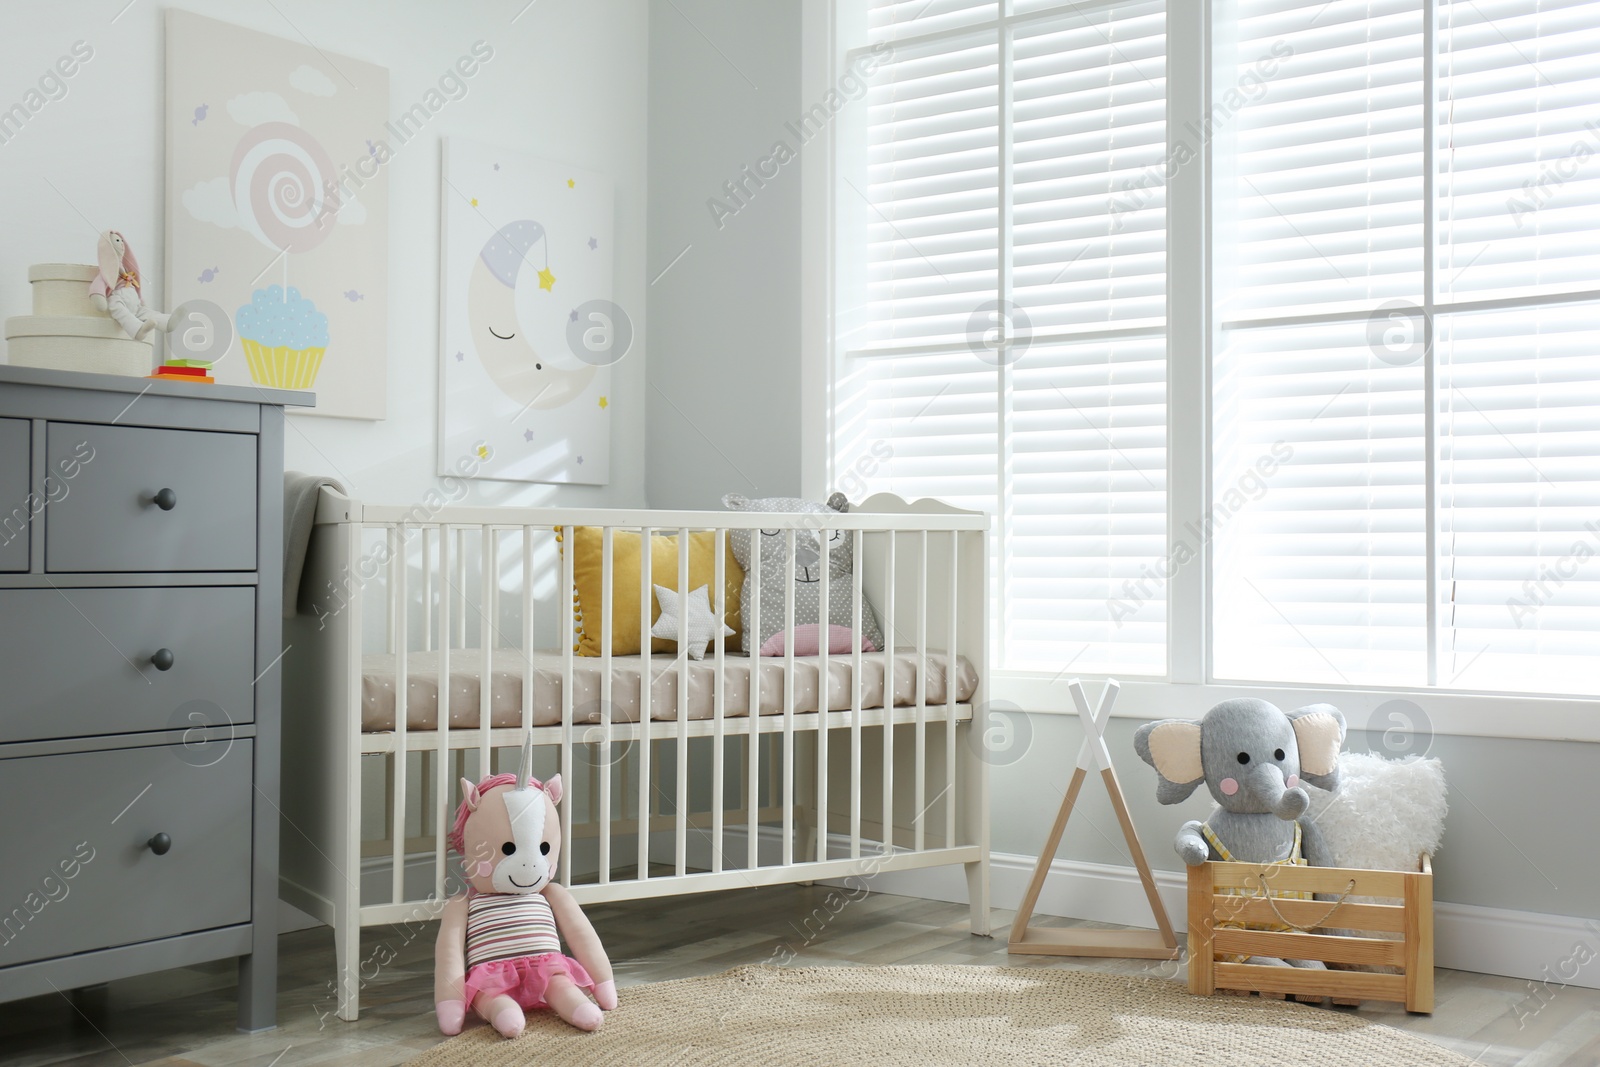 Photo of Baby room interior with cute posters and crib